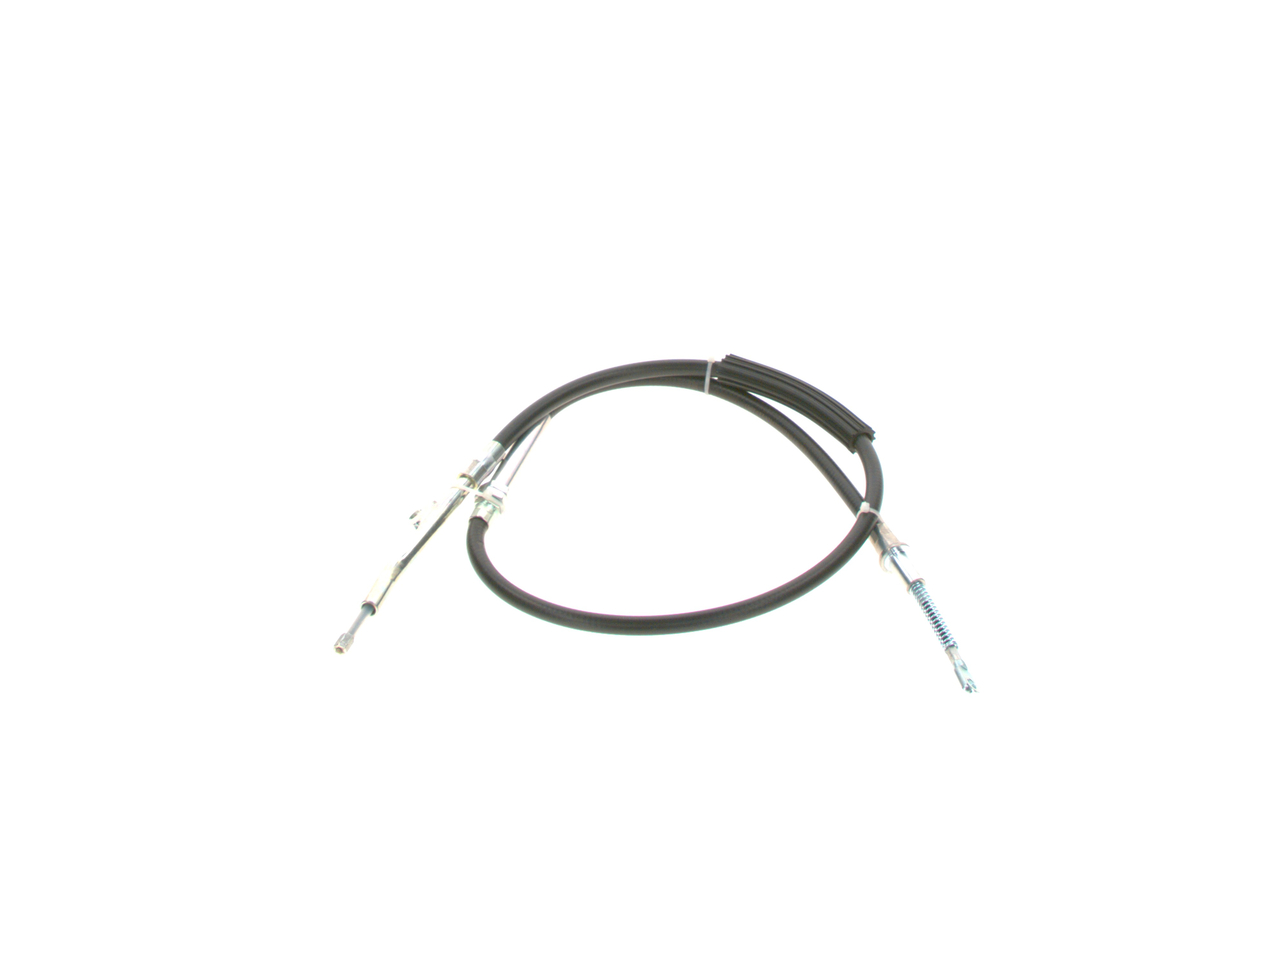 BOSCH 1 987 477 533 Hand brake cable 1265mm